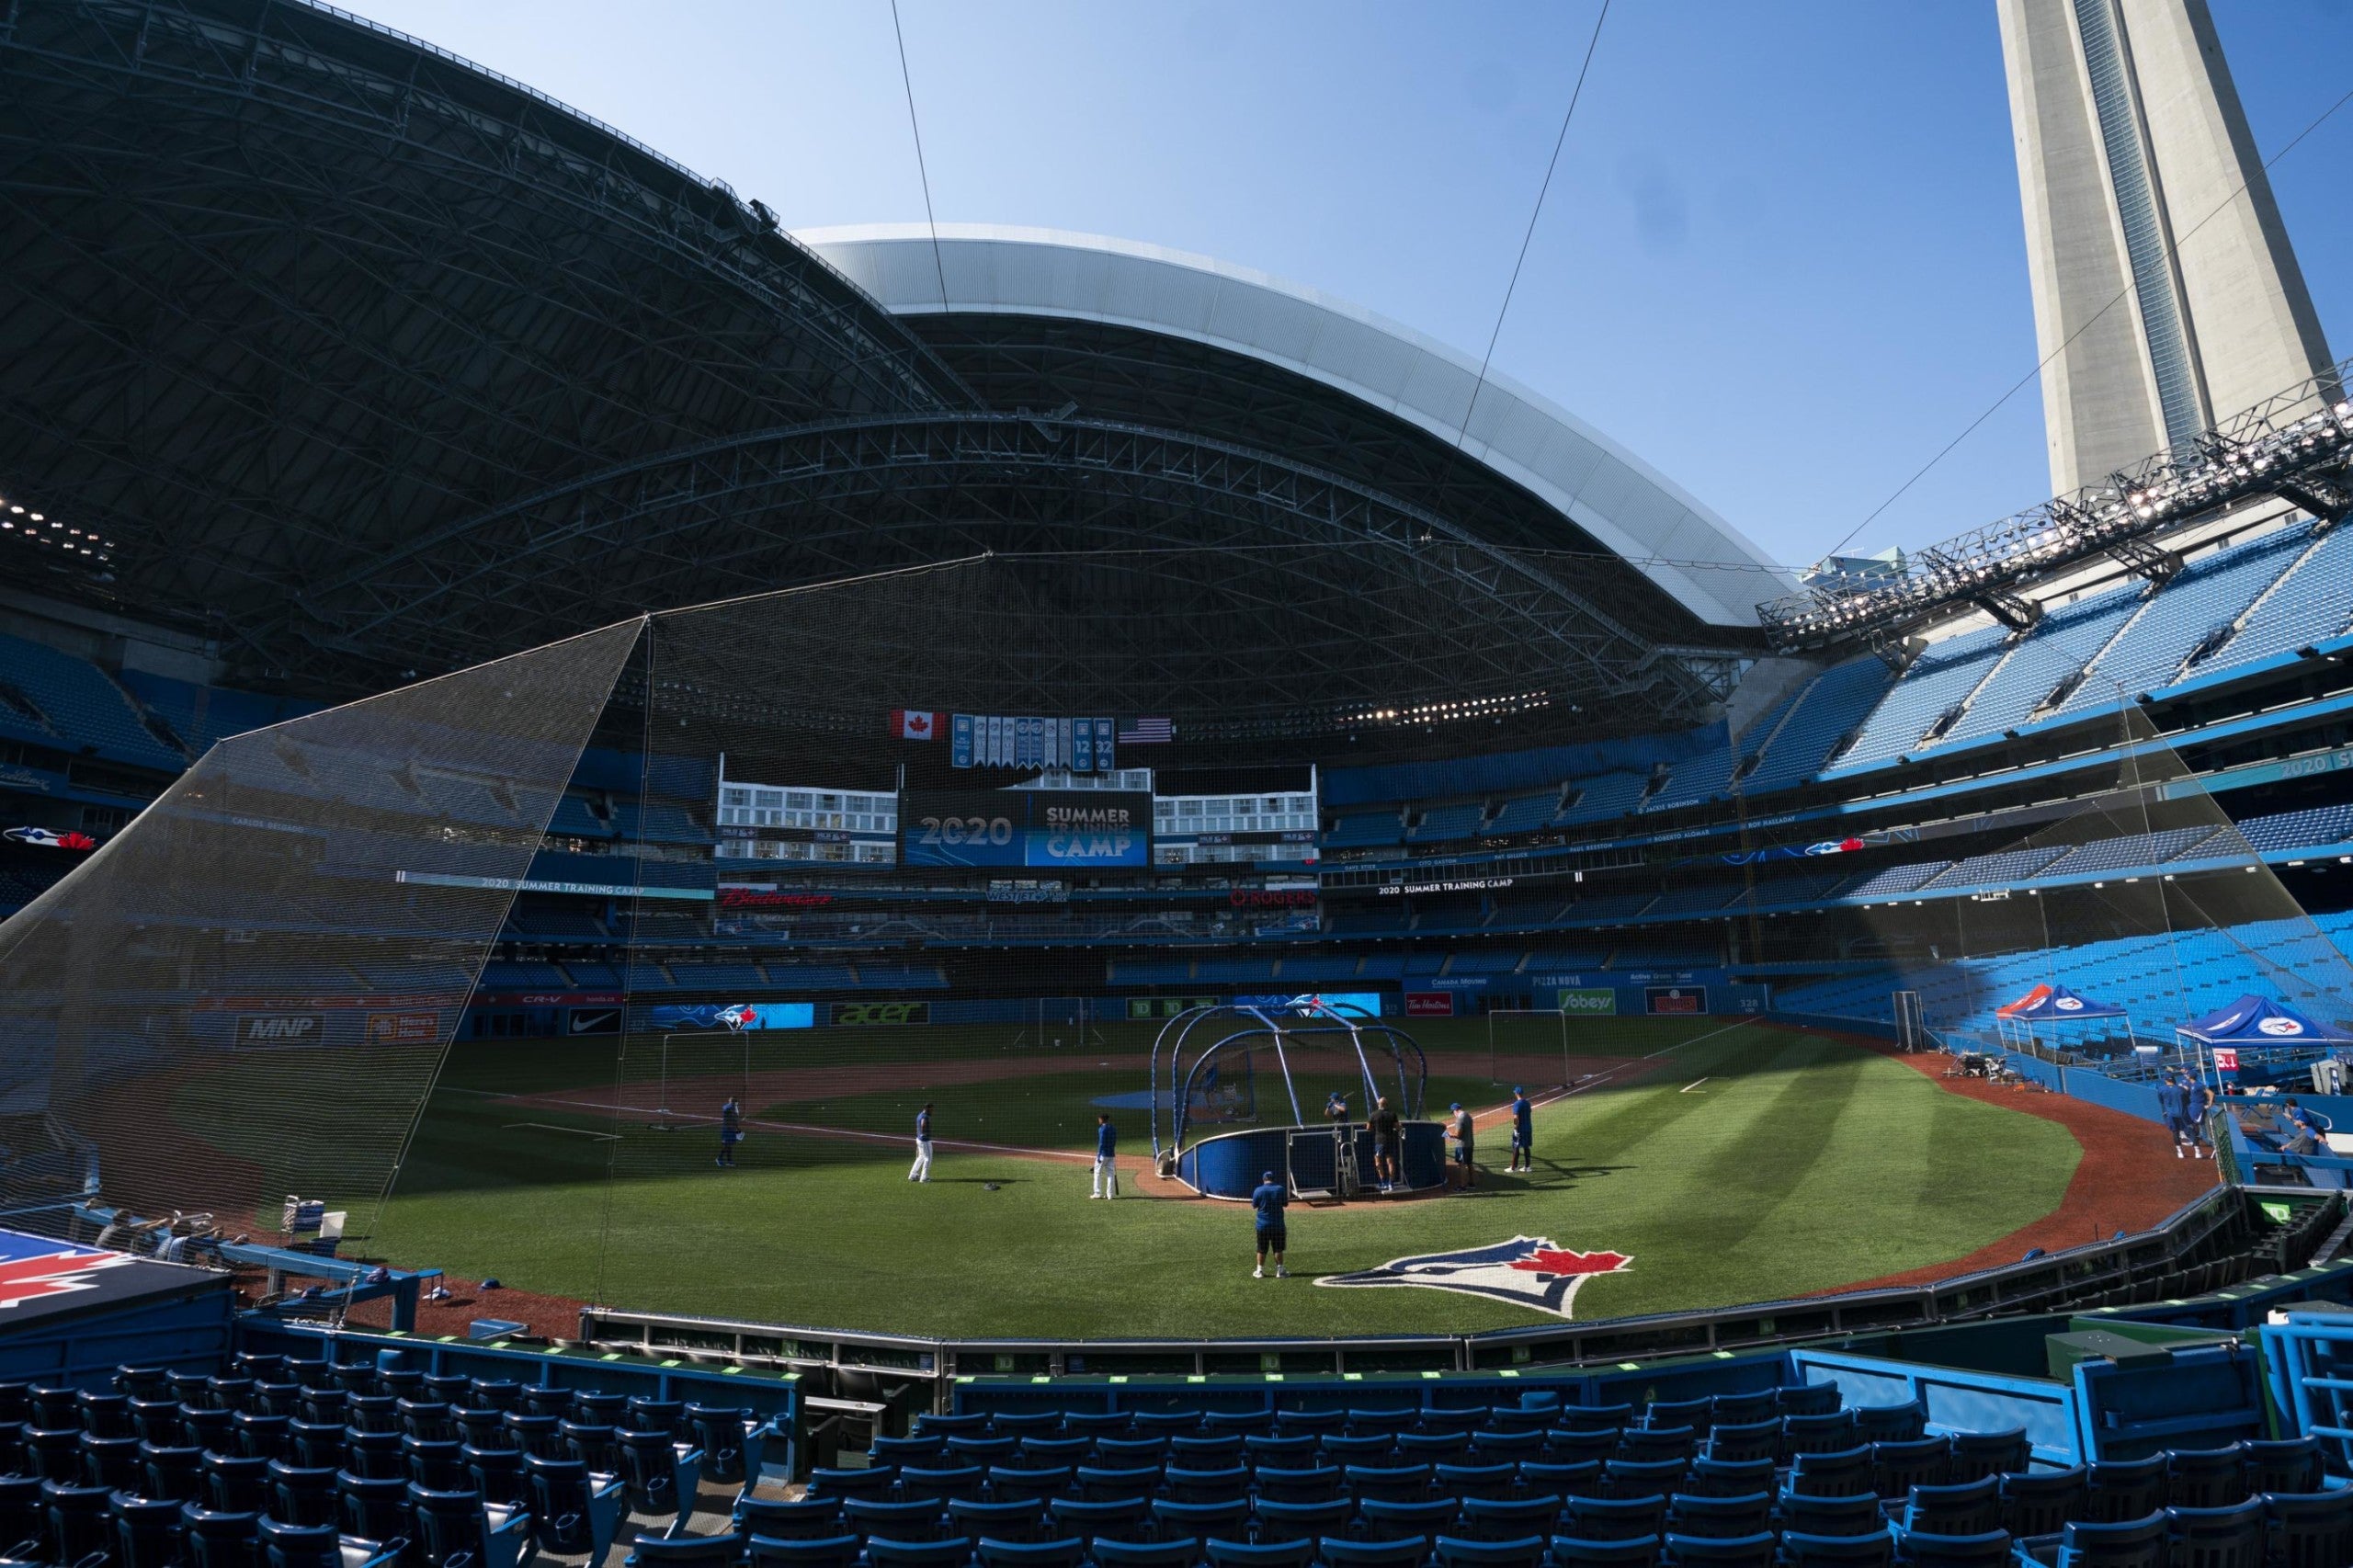 Toronto Blue Jays barred from playing games in home stadium